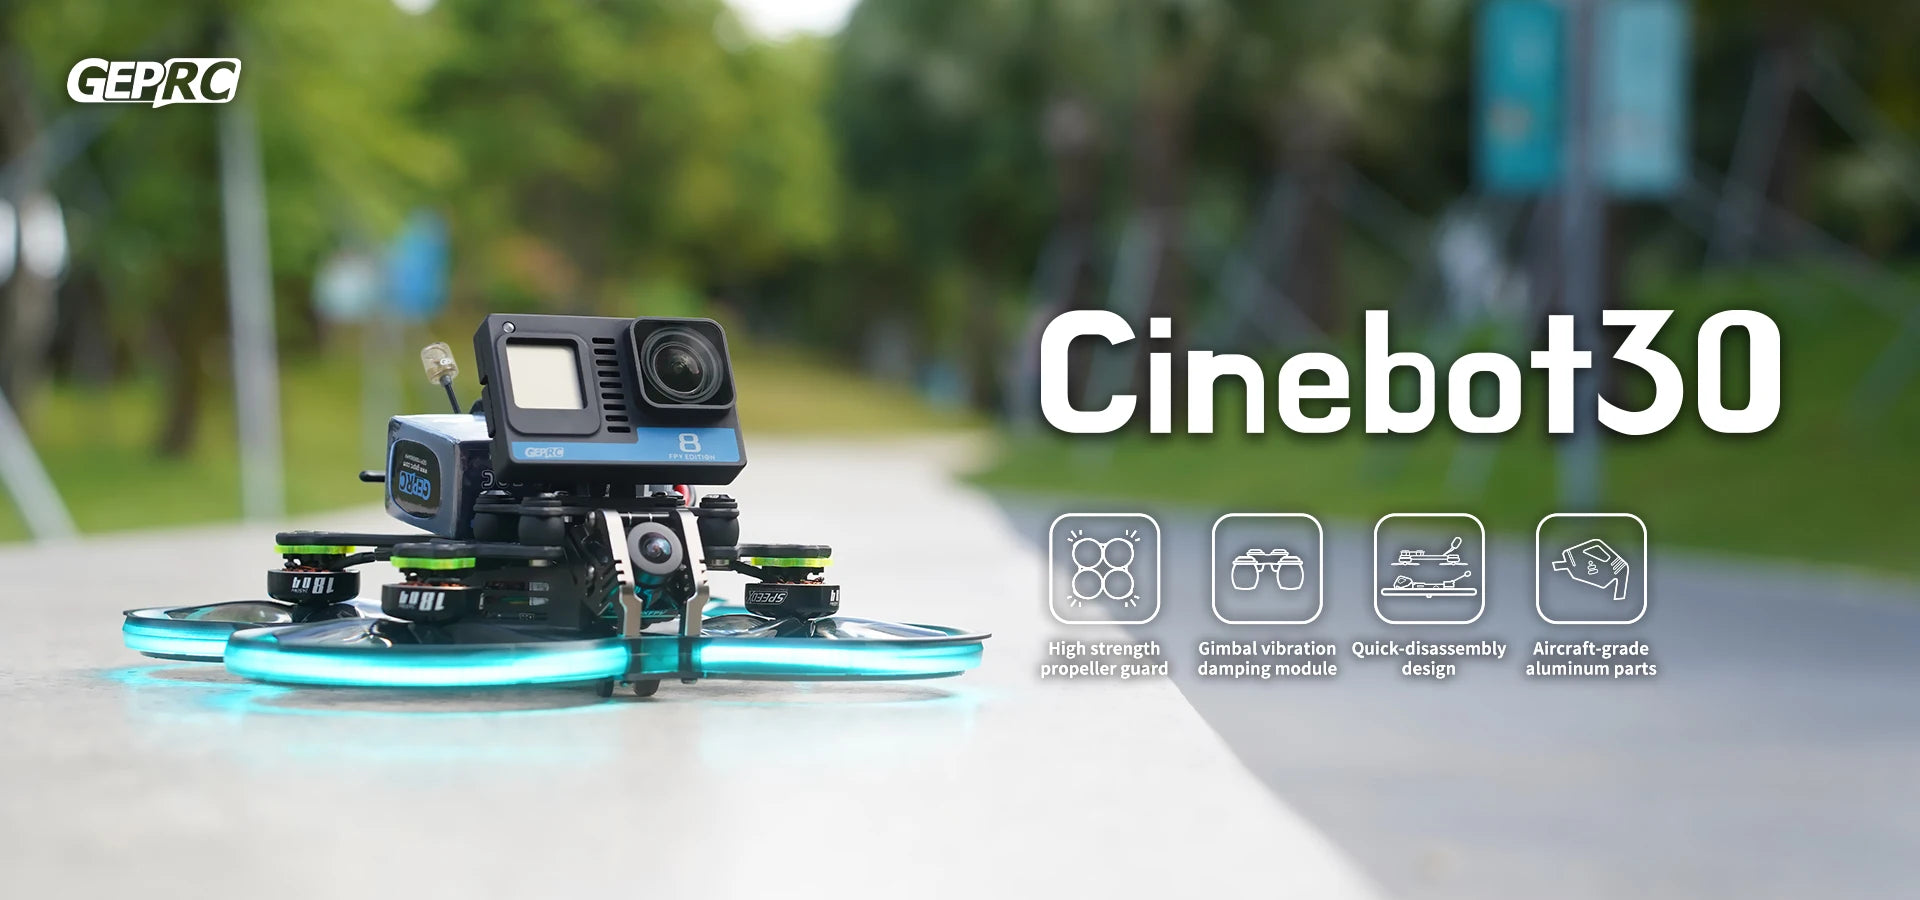 GEPRC Cinebot30 FPV Drone, GEPRC Cinebot3o 8 CRG 3- 2 High strength Gimbal vibration Quick